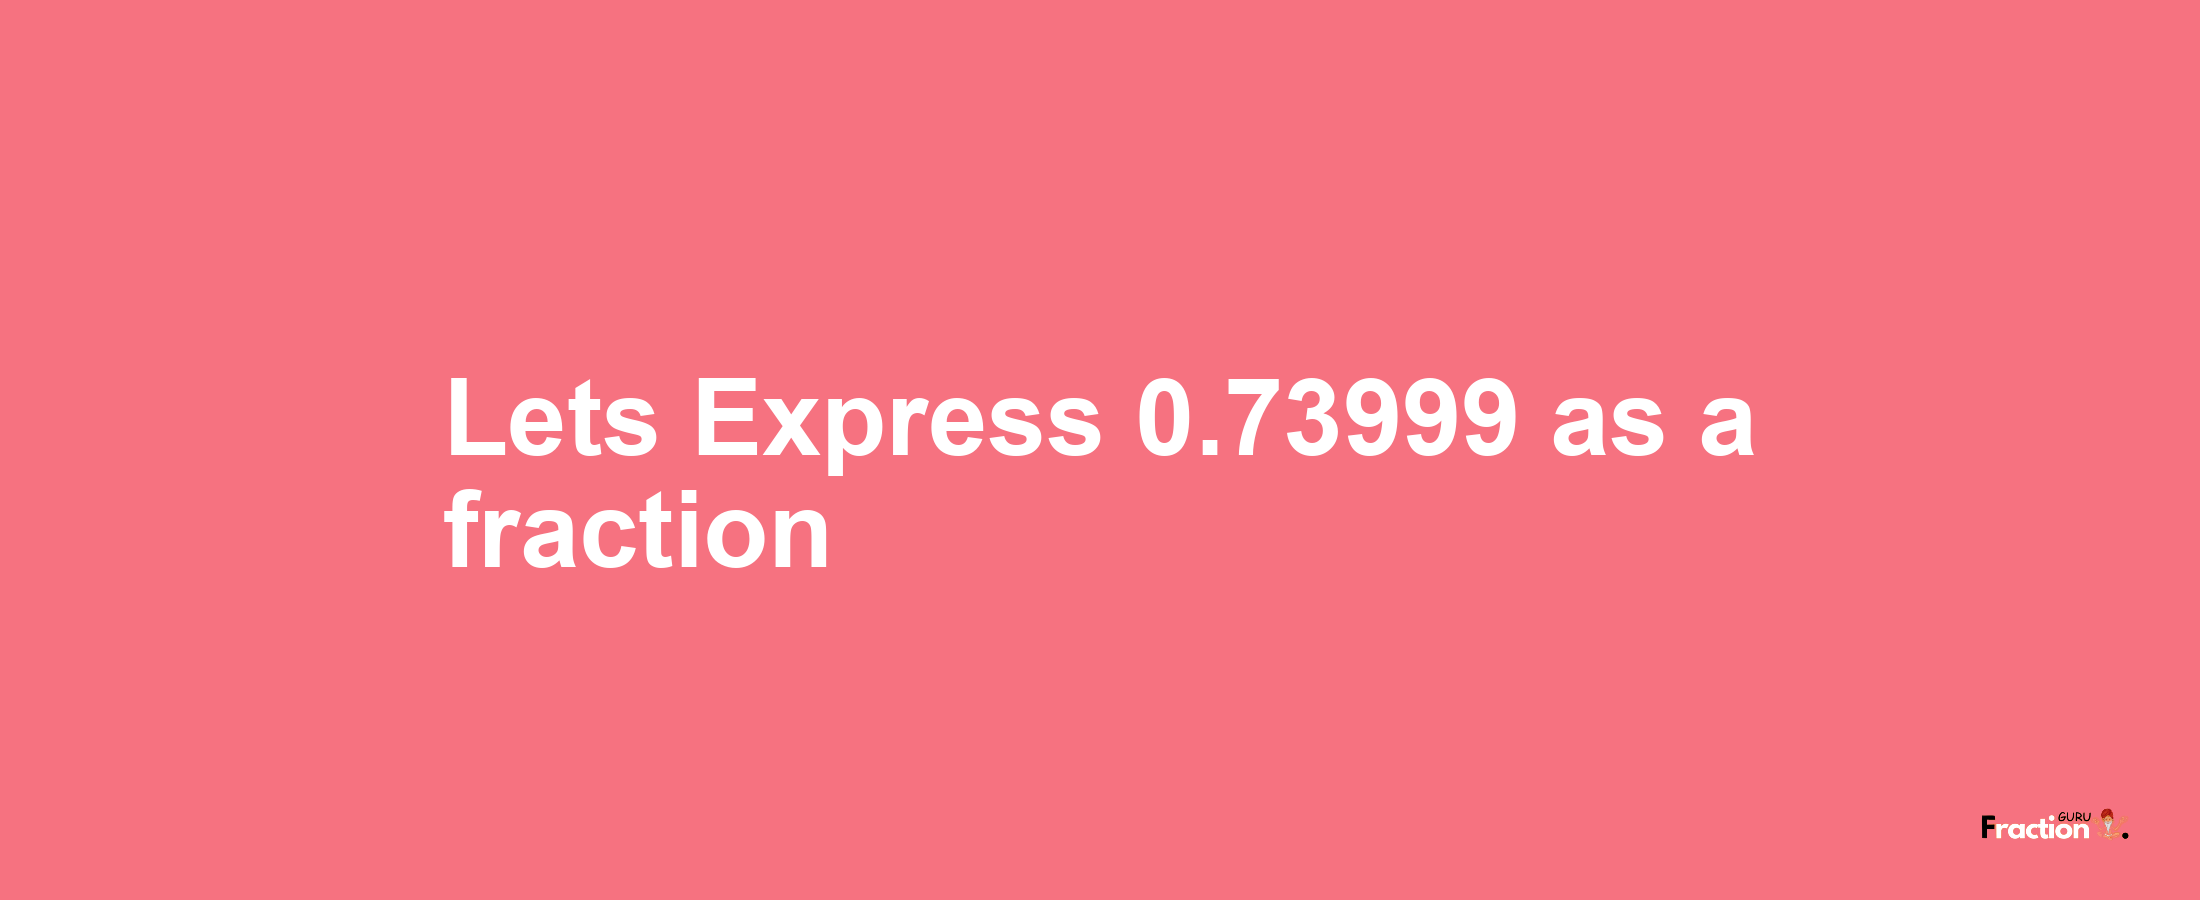 Lets Express 0.73999 as afraction